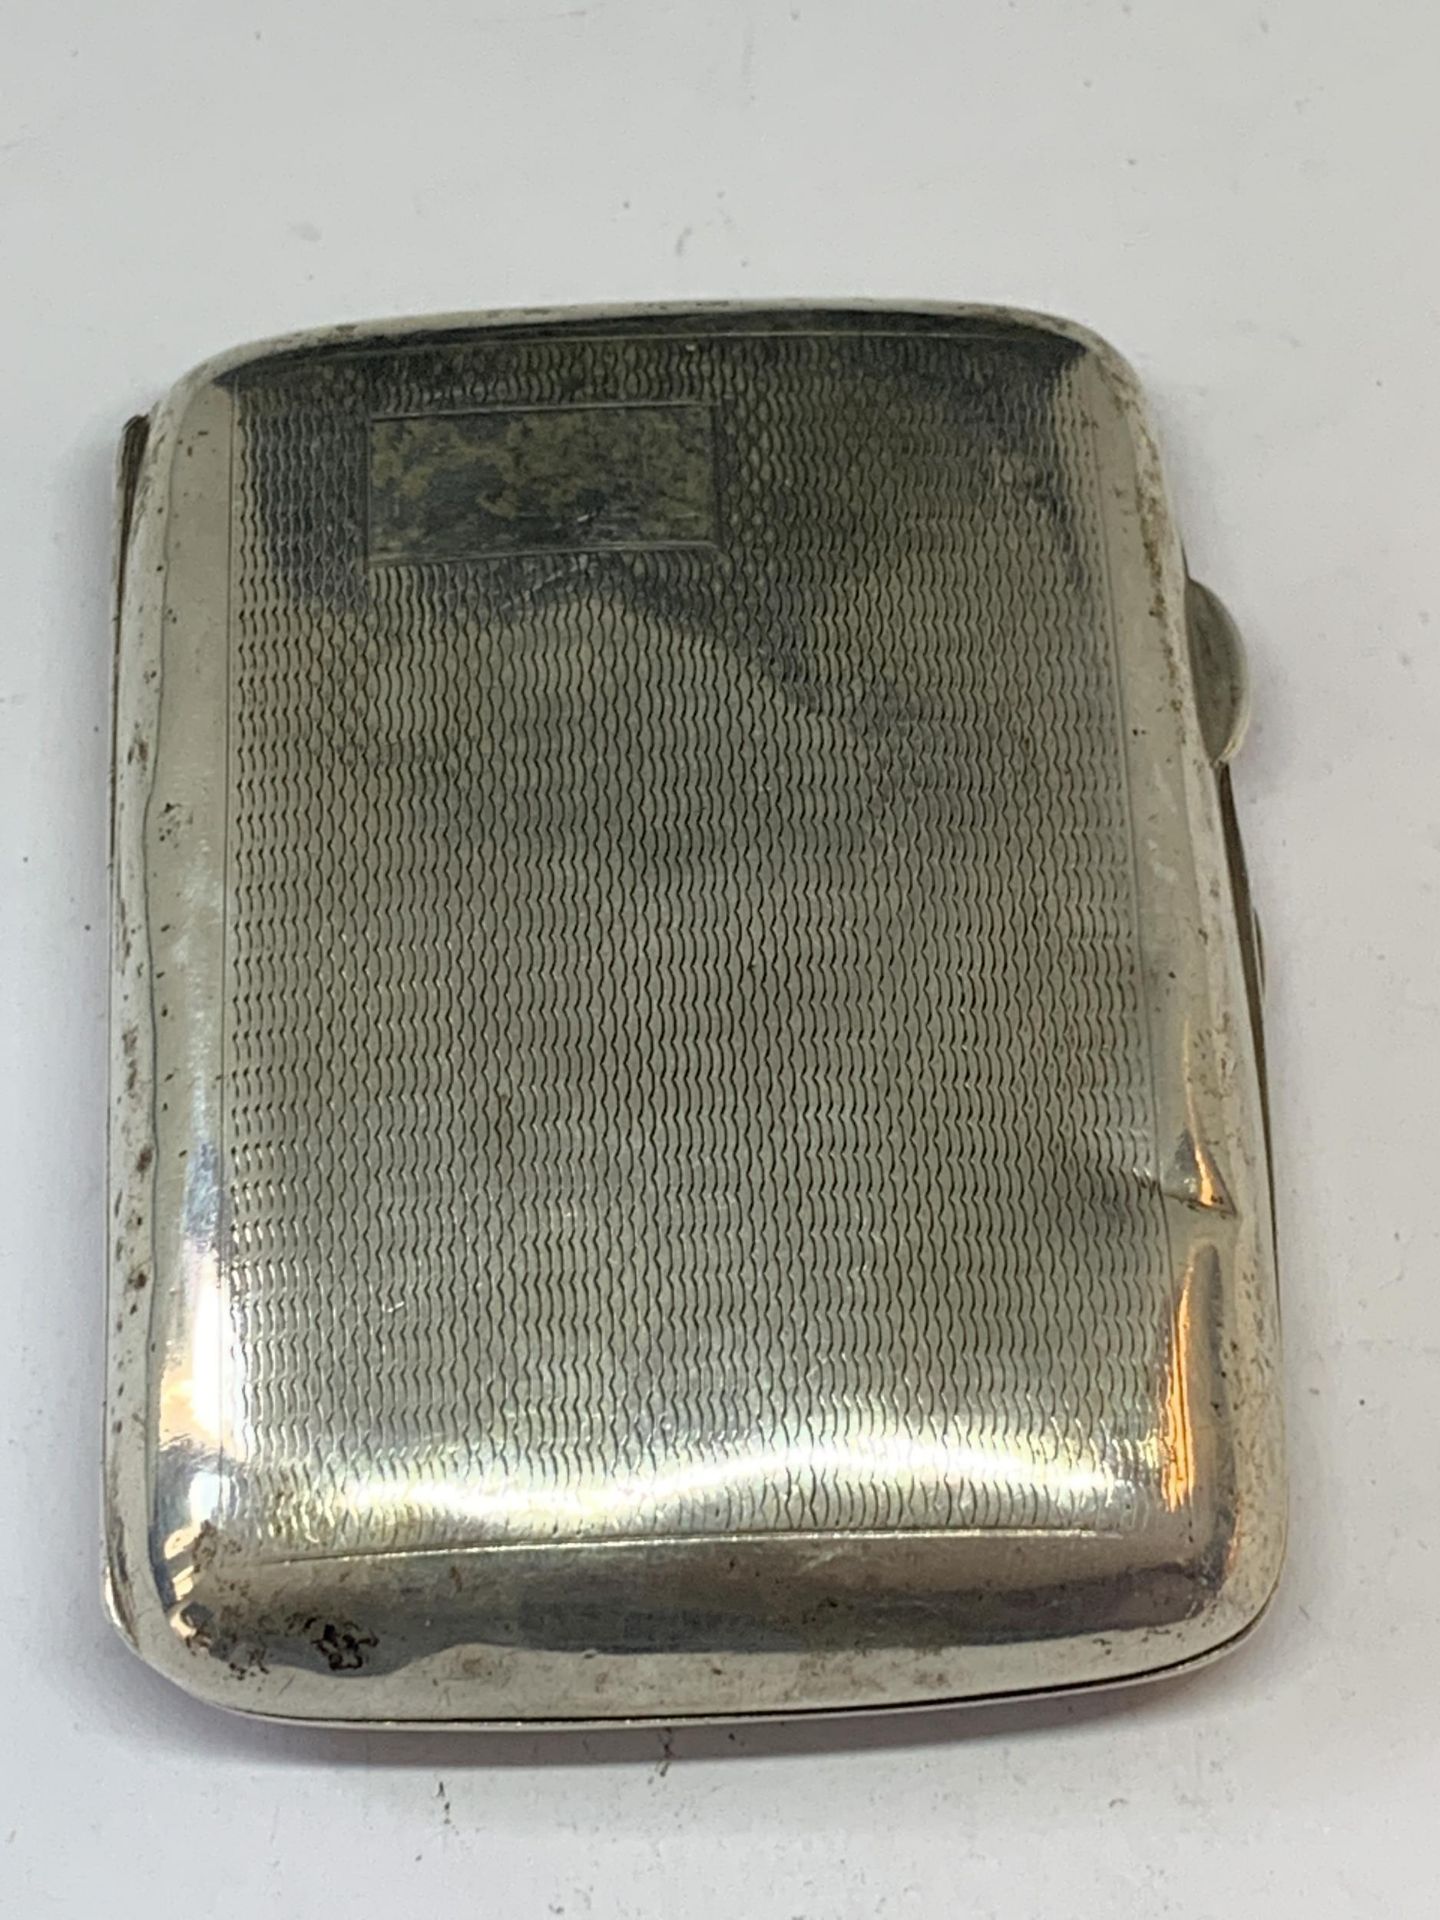 A HALLMARKED CHESTER SILVER CHEROOT CASE WEIGHT 46.7 GRAMS